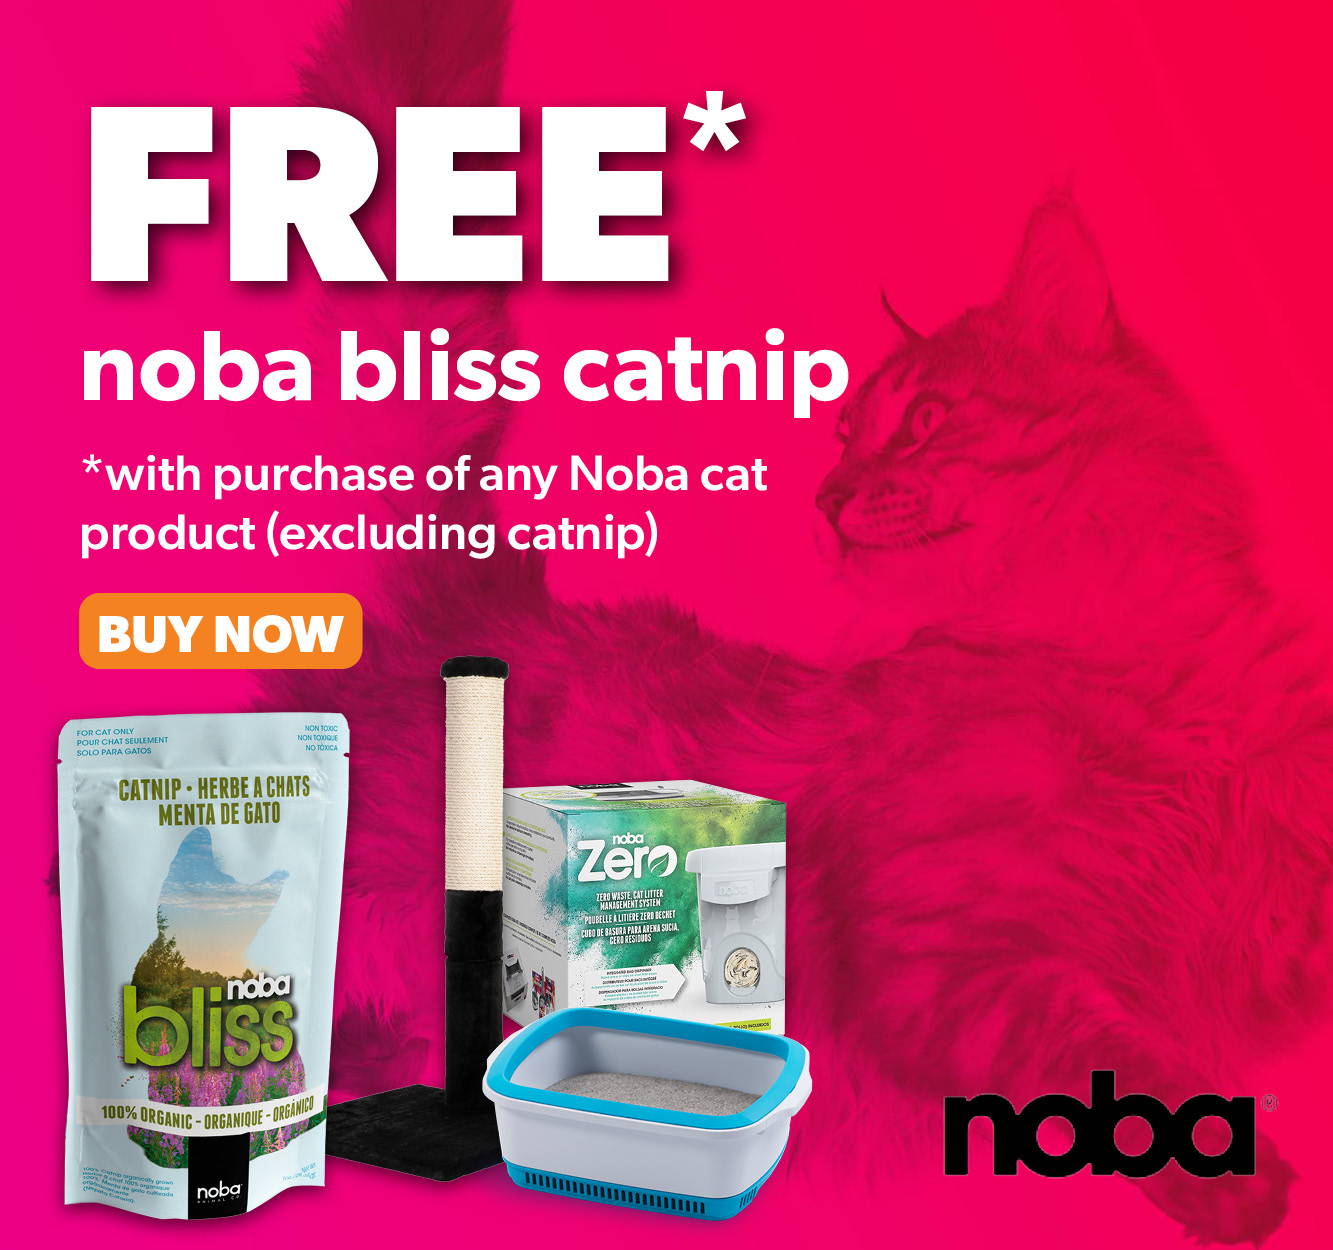 Free Noba Bliss Catnip with purchase of any Noba cat product (excluding catnip)